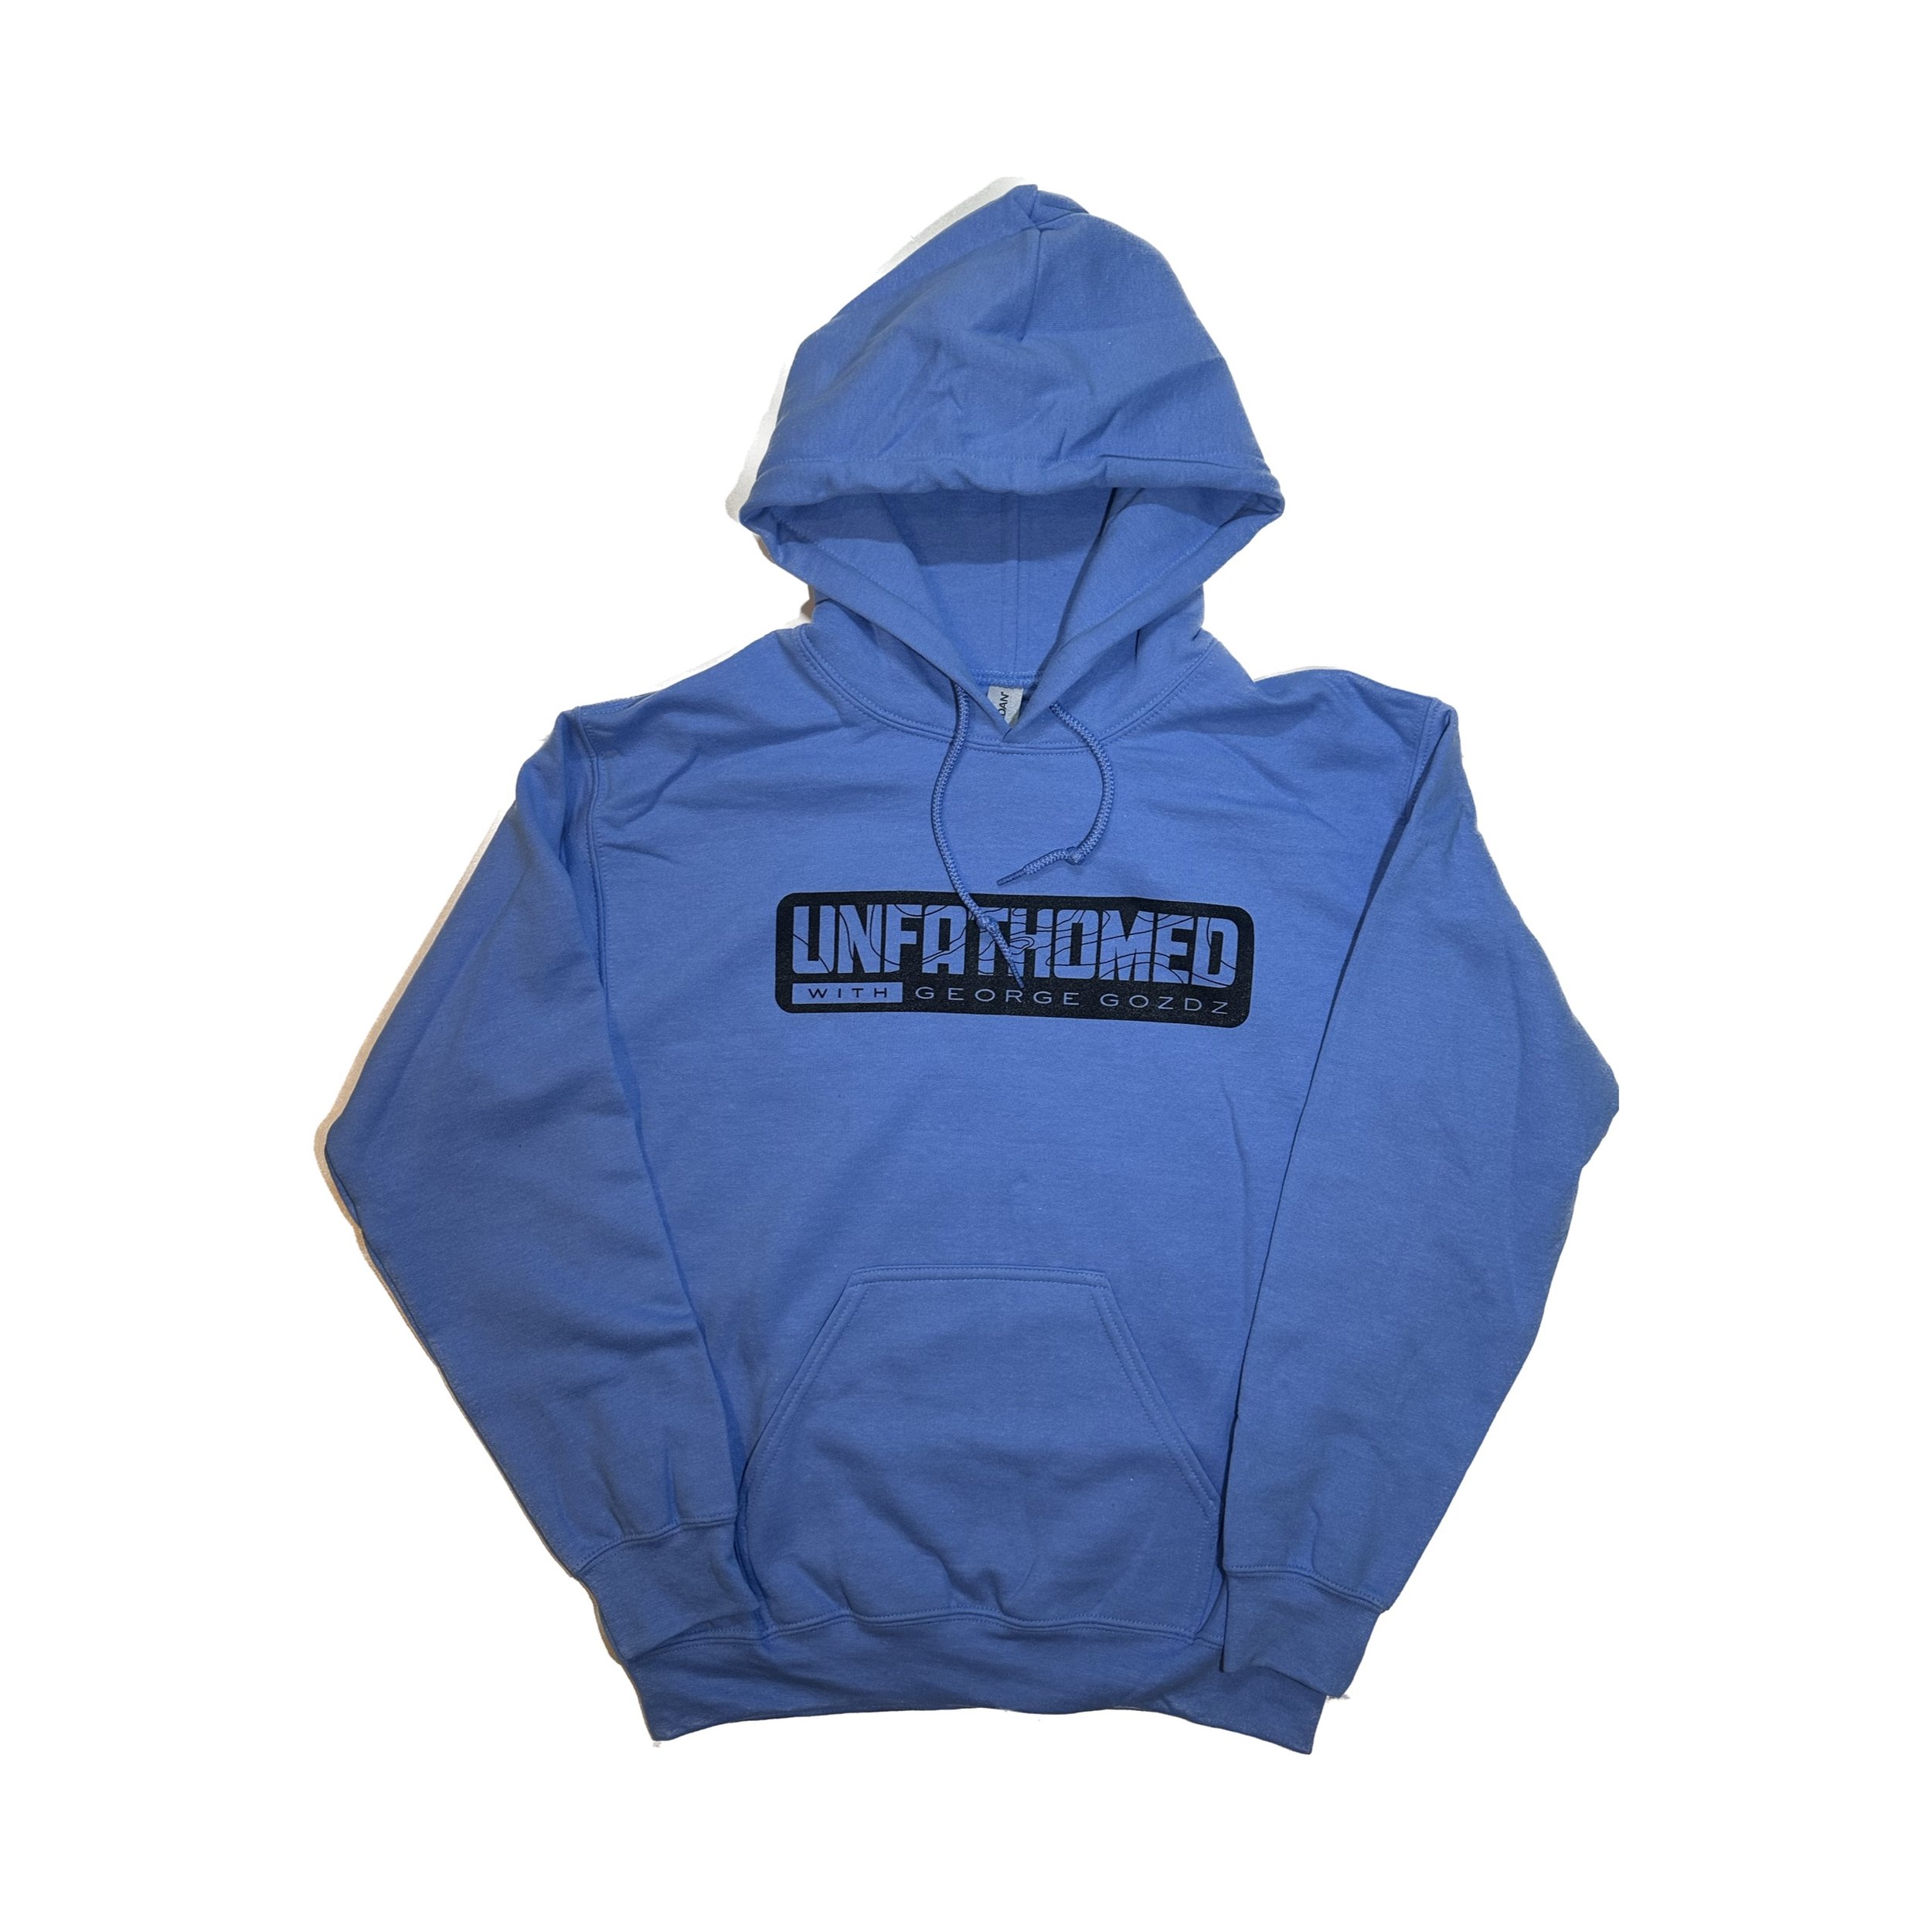 Store — Unfathomed